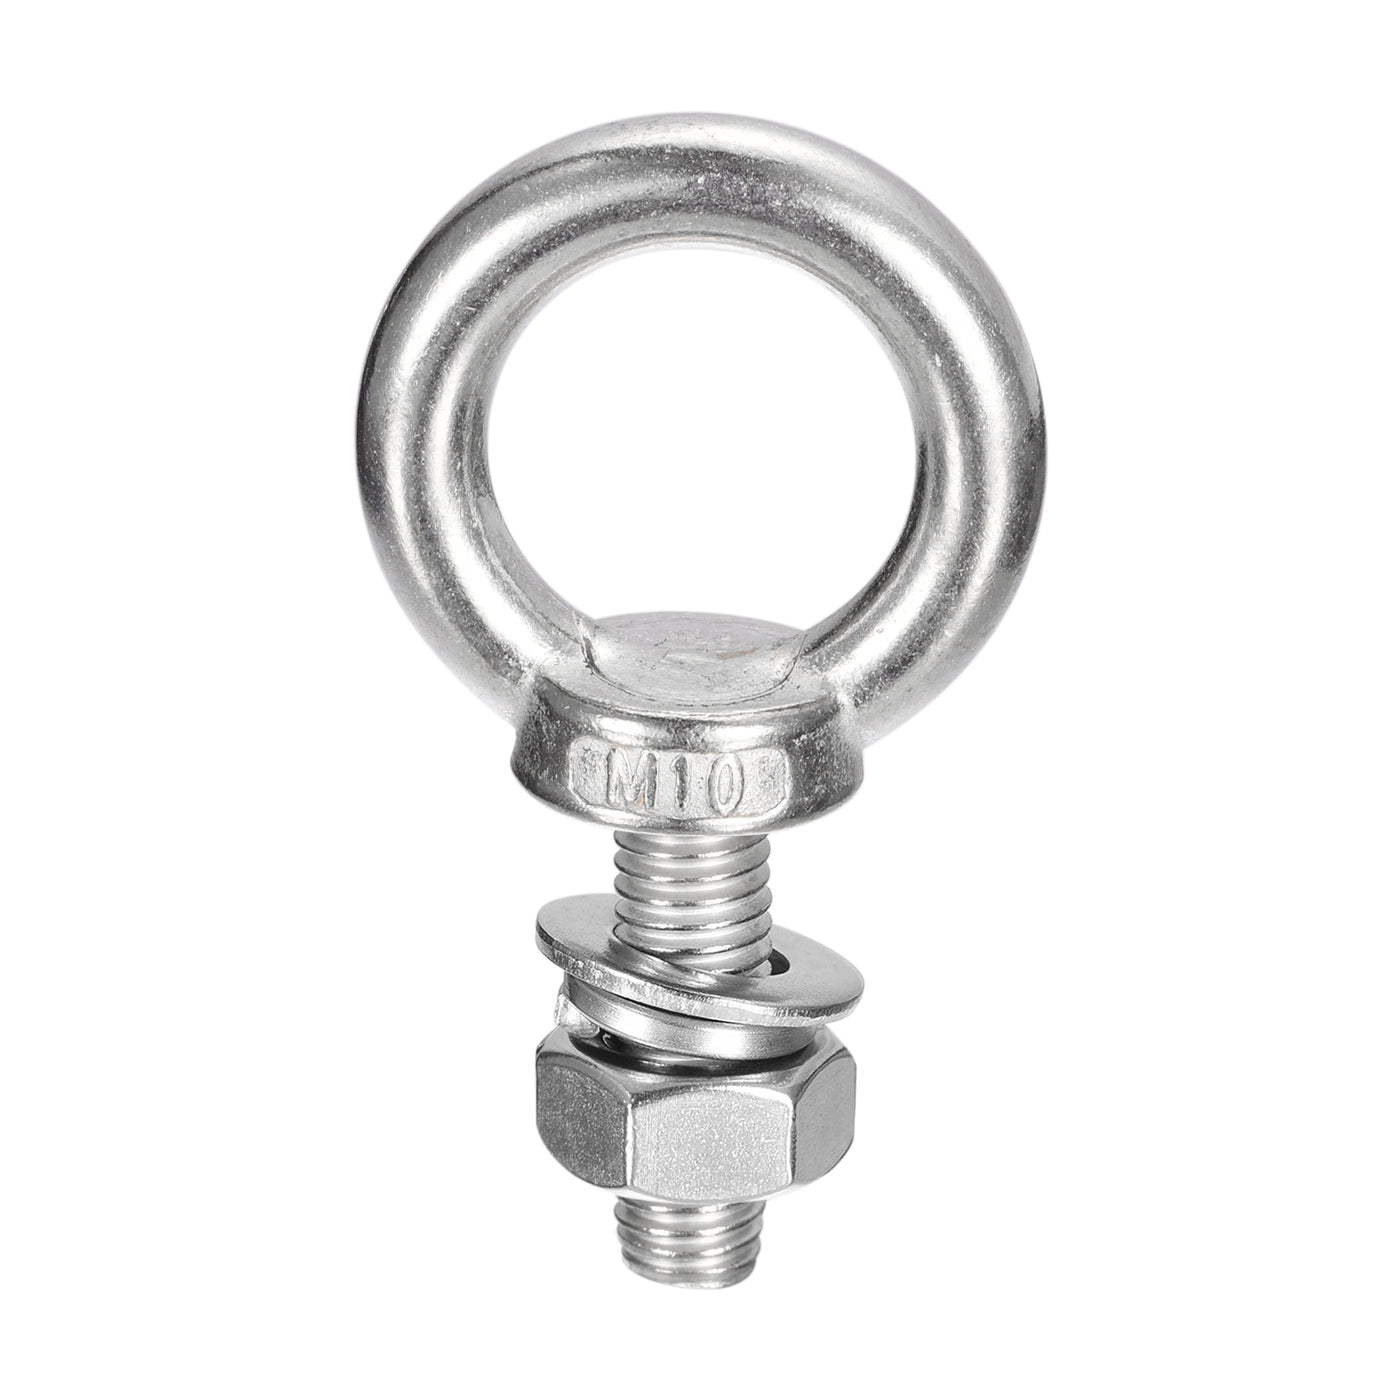 uxcell Uxcell Lifting Eye Bolt, 1 Set M10x30mm Eye Bolt with Nut Washer 304 Stainless Steel